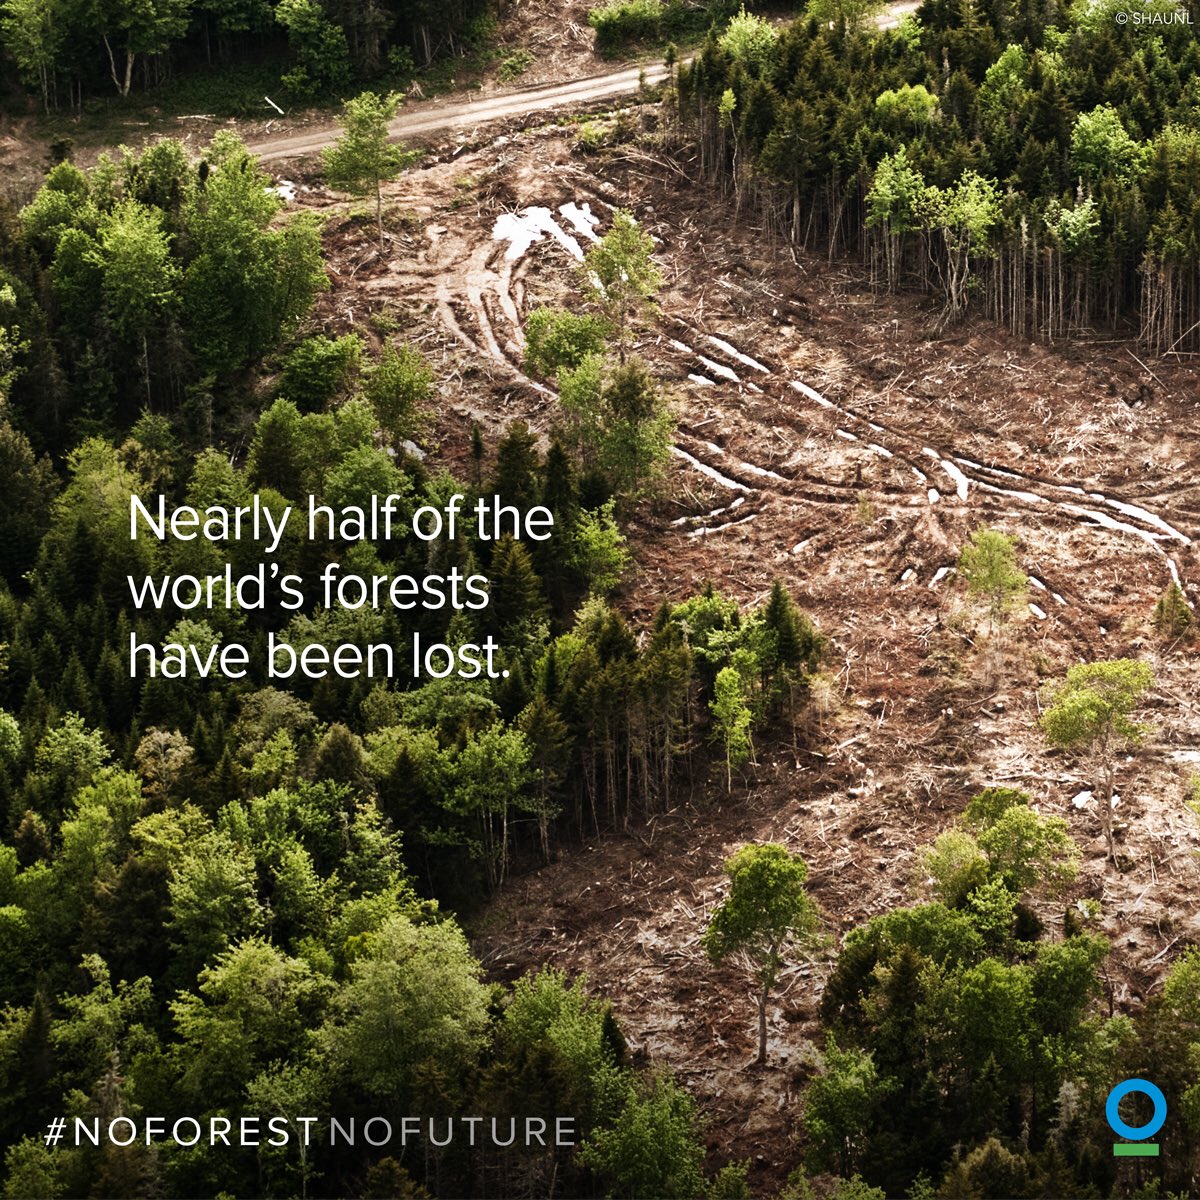 Join me & protect an acre
for #IntlForestsDay
with @ConservationOrg
@SCJohnson will match it
#NoForestsNoFuture
ci-intl.org/2n72LDt